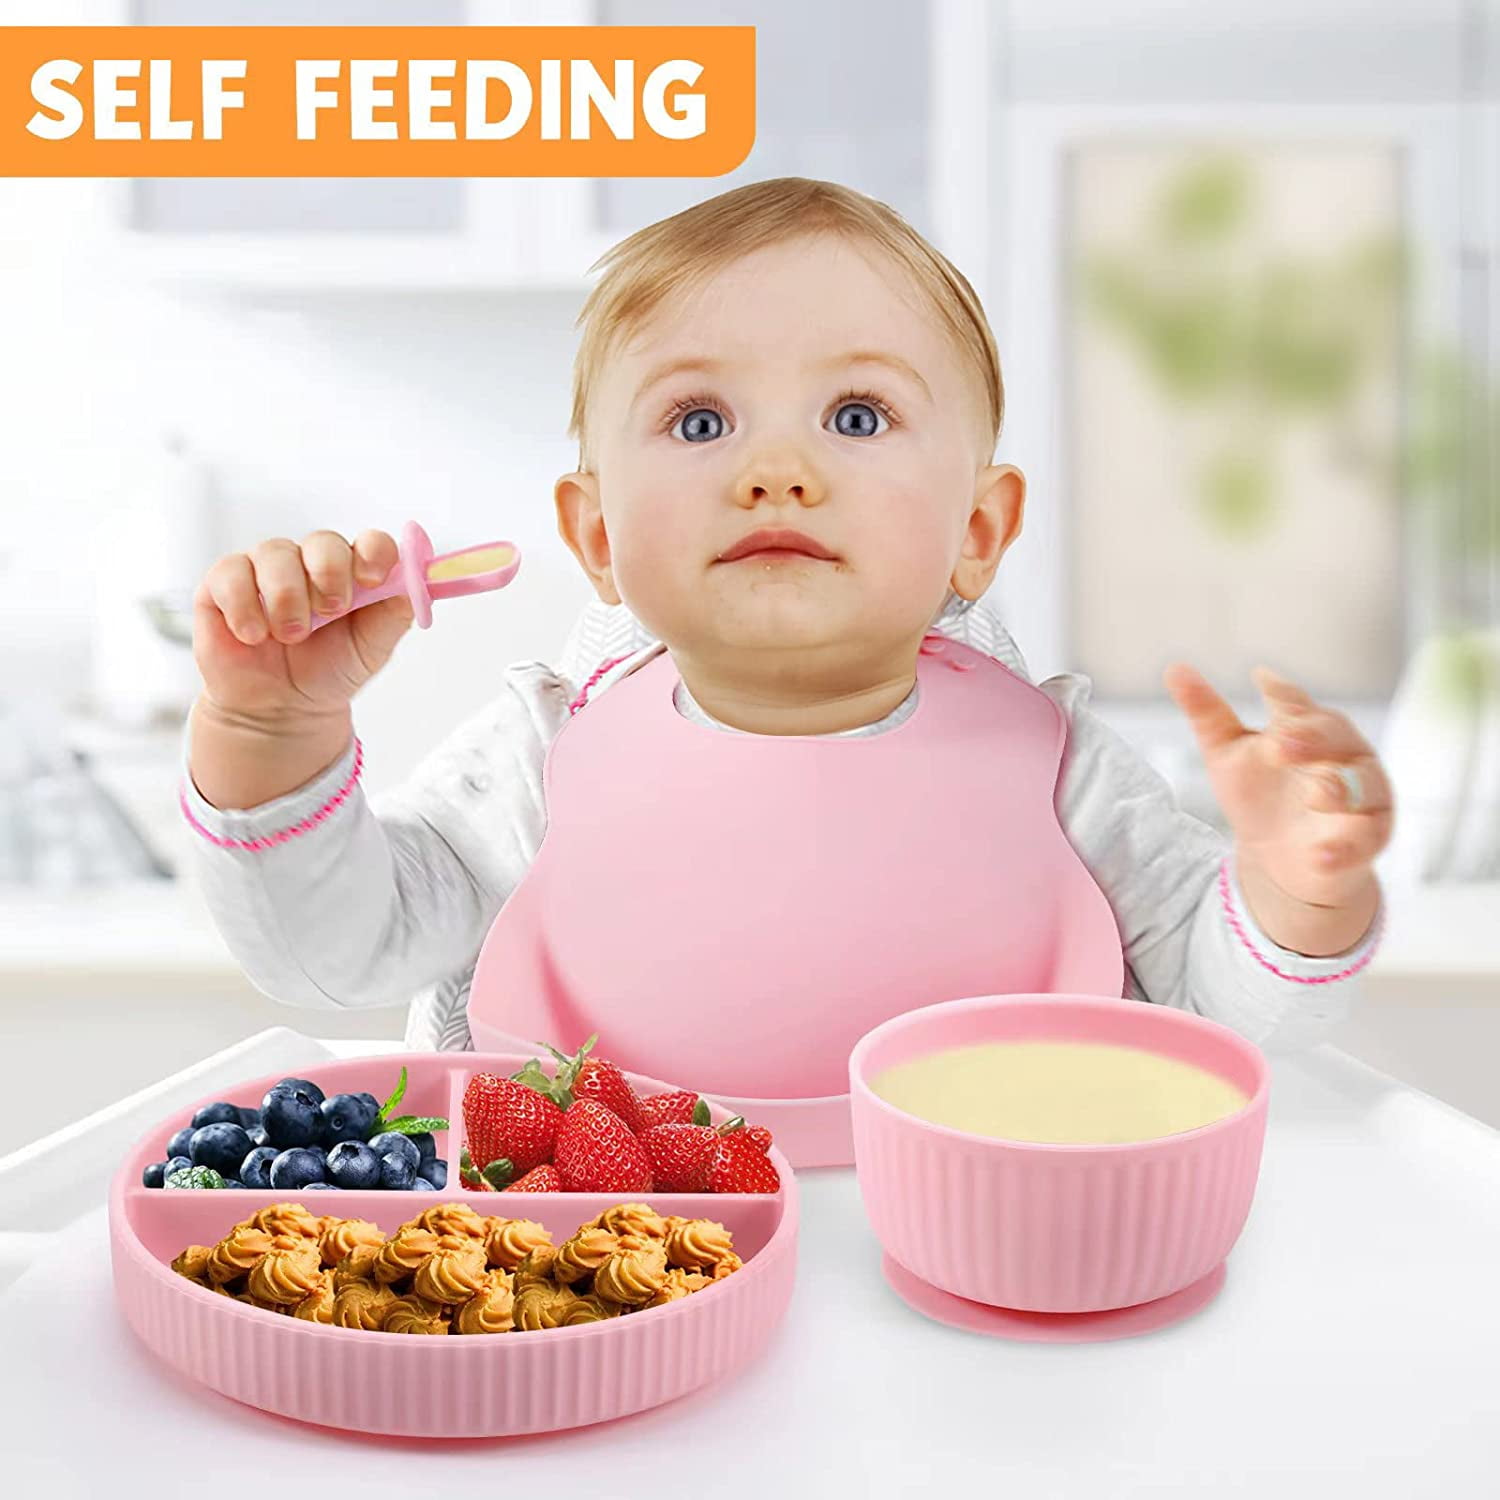 Baby Led Weaning Supplies, 16Pack Silicone Baby Feeding Set Baby Feeding  Supplies Baby Eating upplies Infant Self Eating Utensil Set with Suction